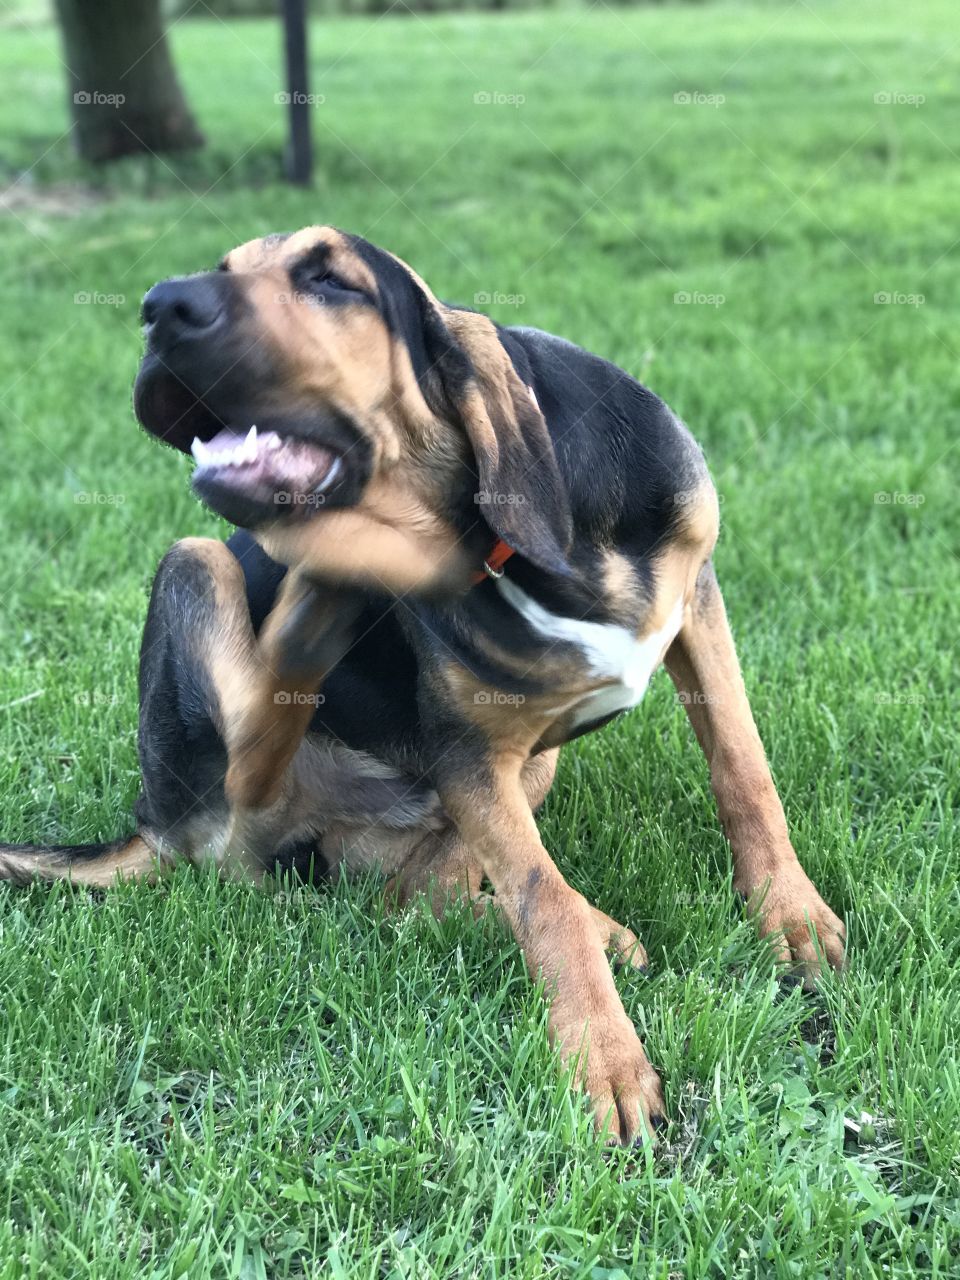 Itchy itchy! Bloodhound